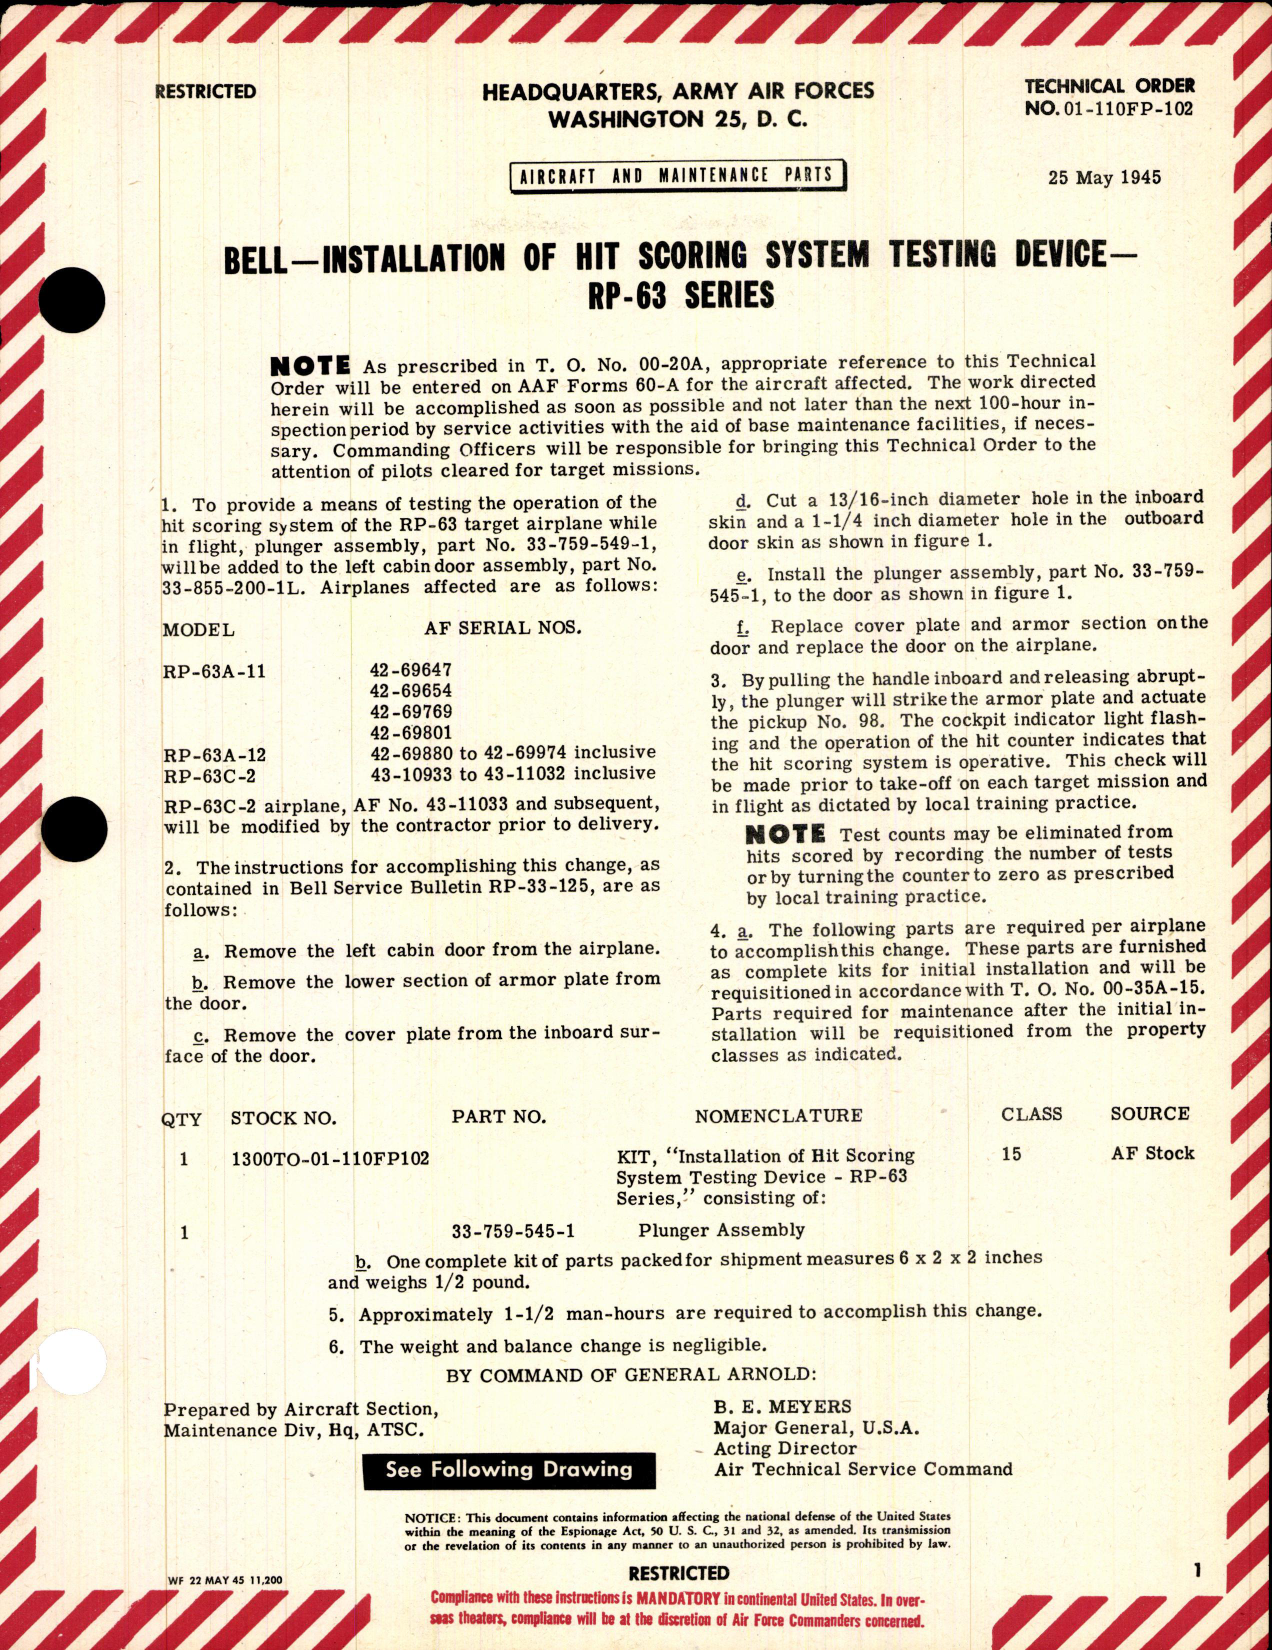 Sample page 1 from AirCorps Library document: Installation of Hit Scoring System Test Device